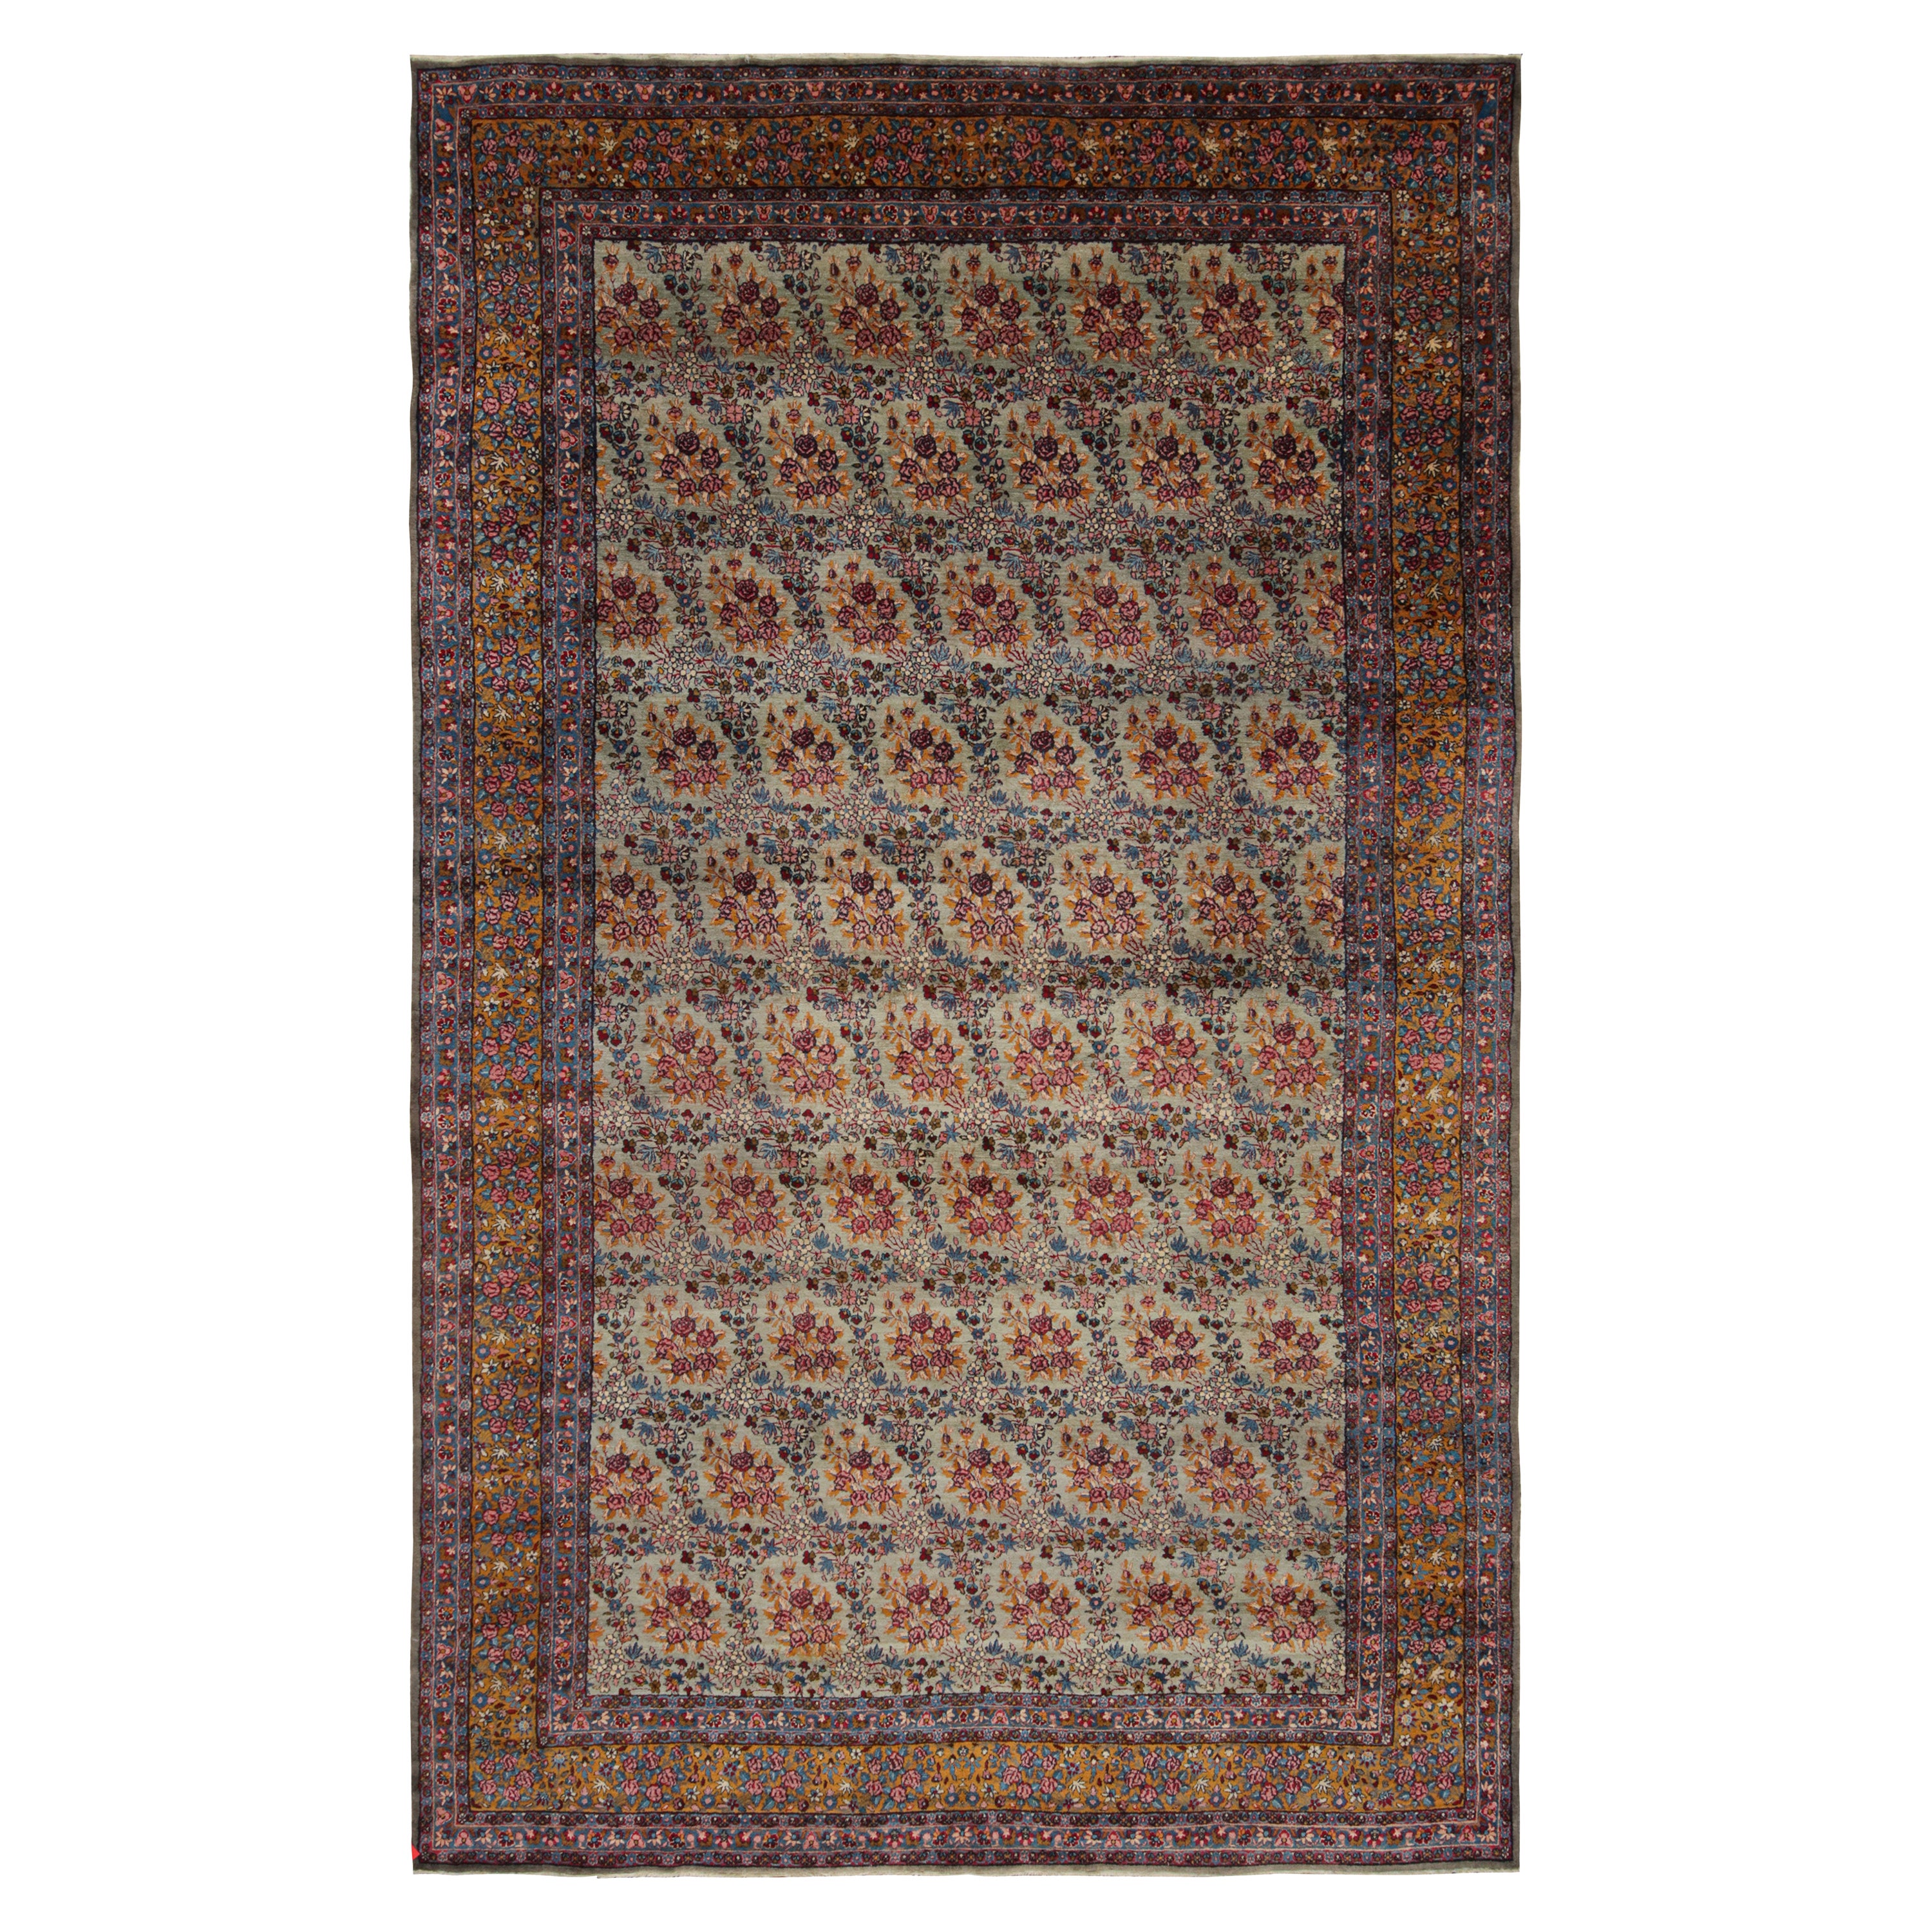 Antique Persian Kerman Rug with Polychromatic Floral Patterns by Rug & Kilim